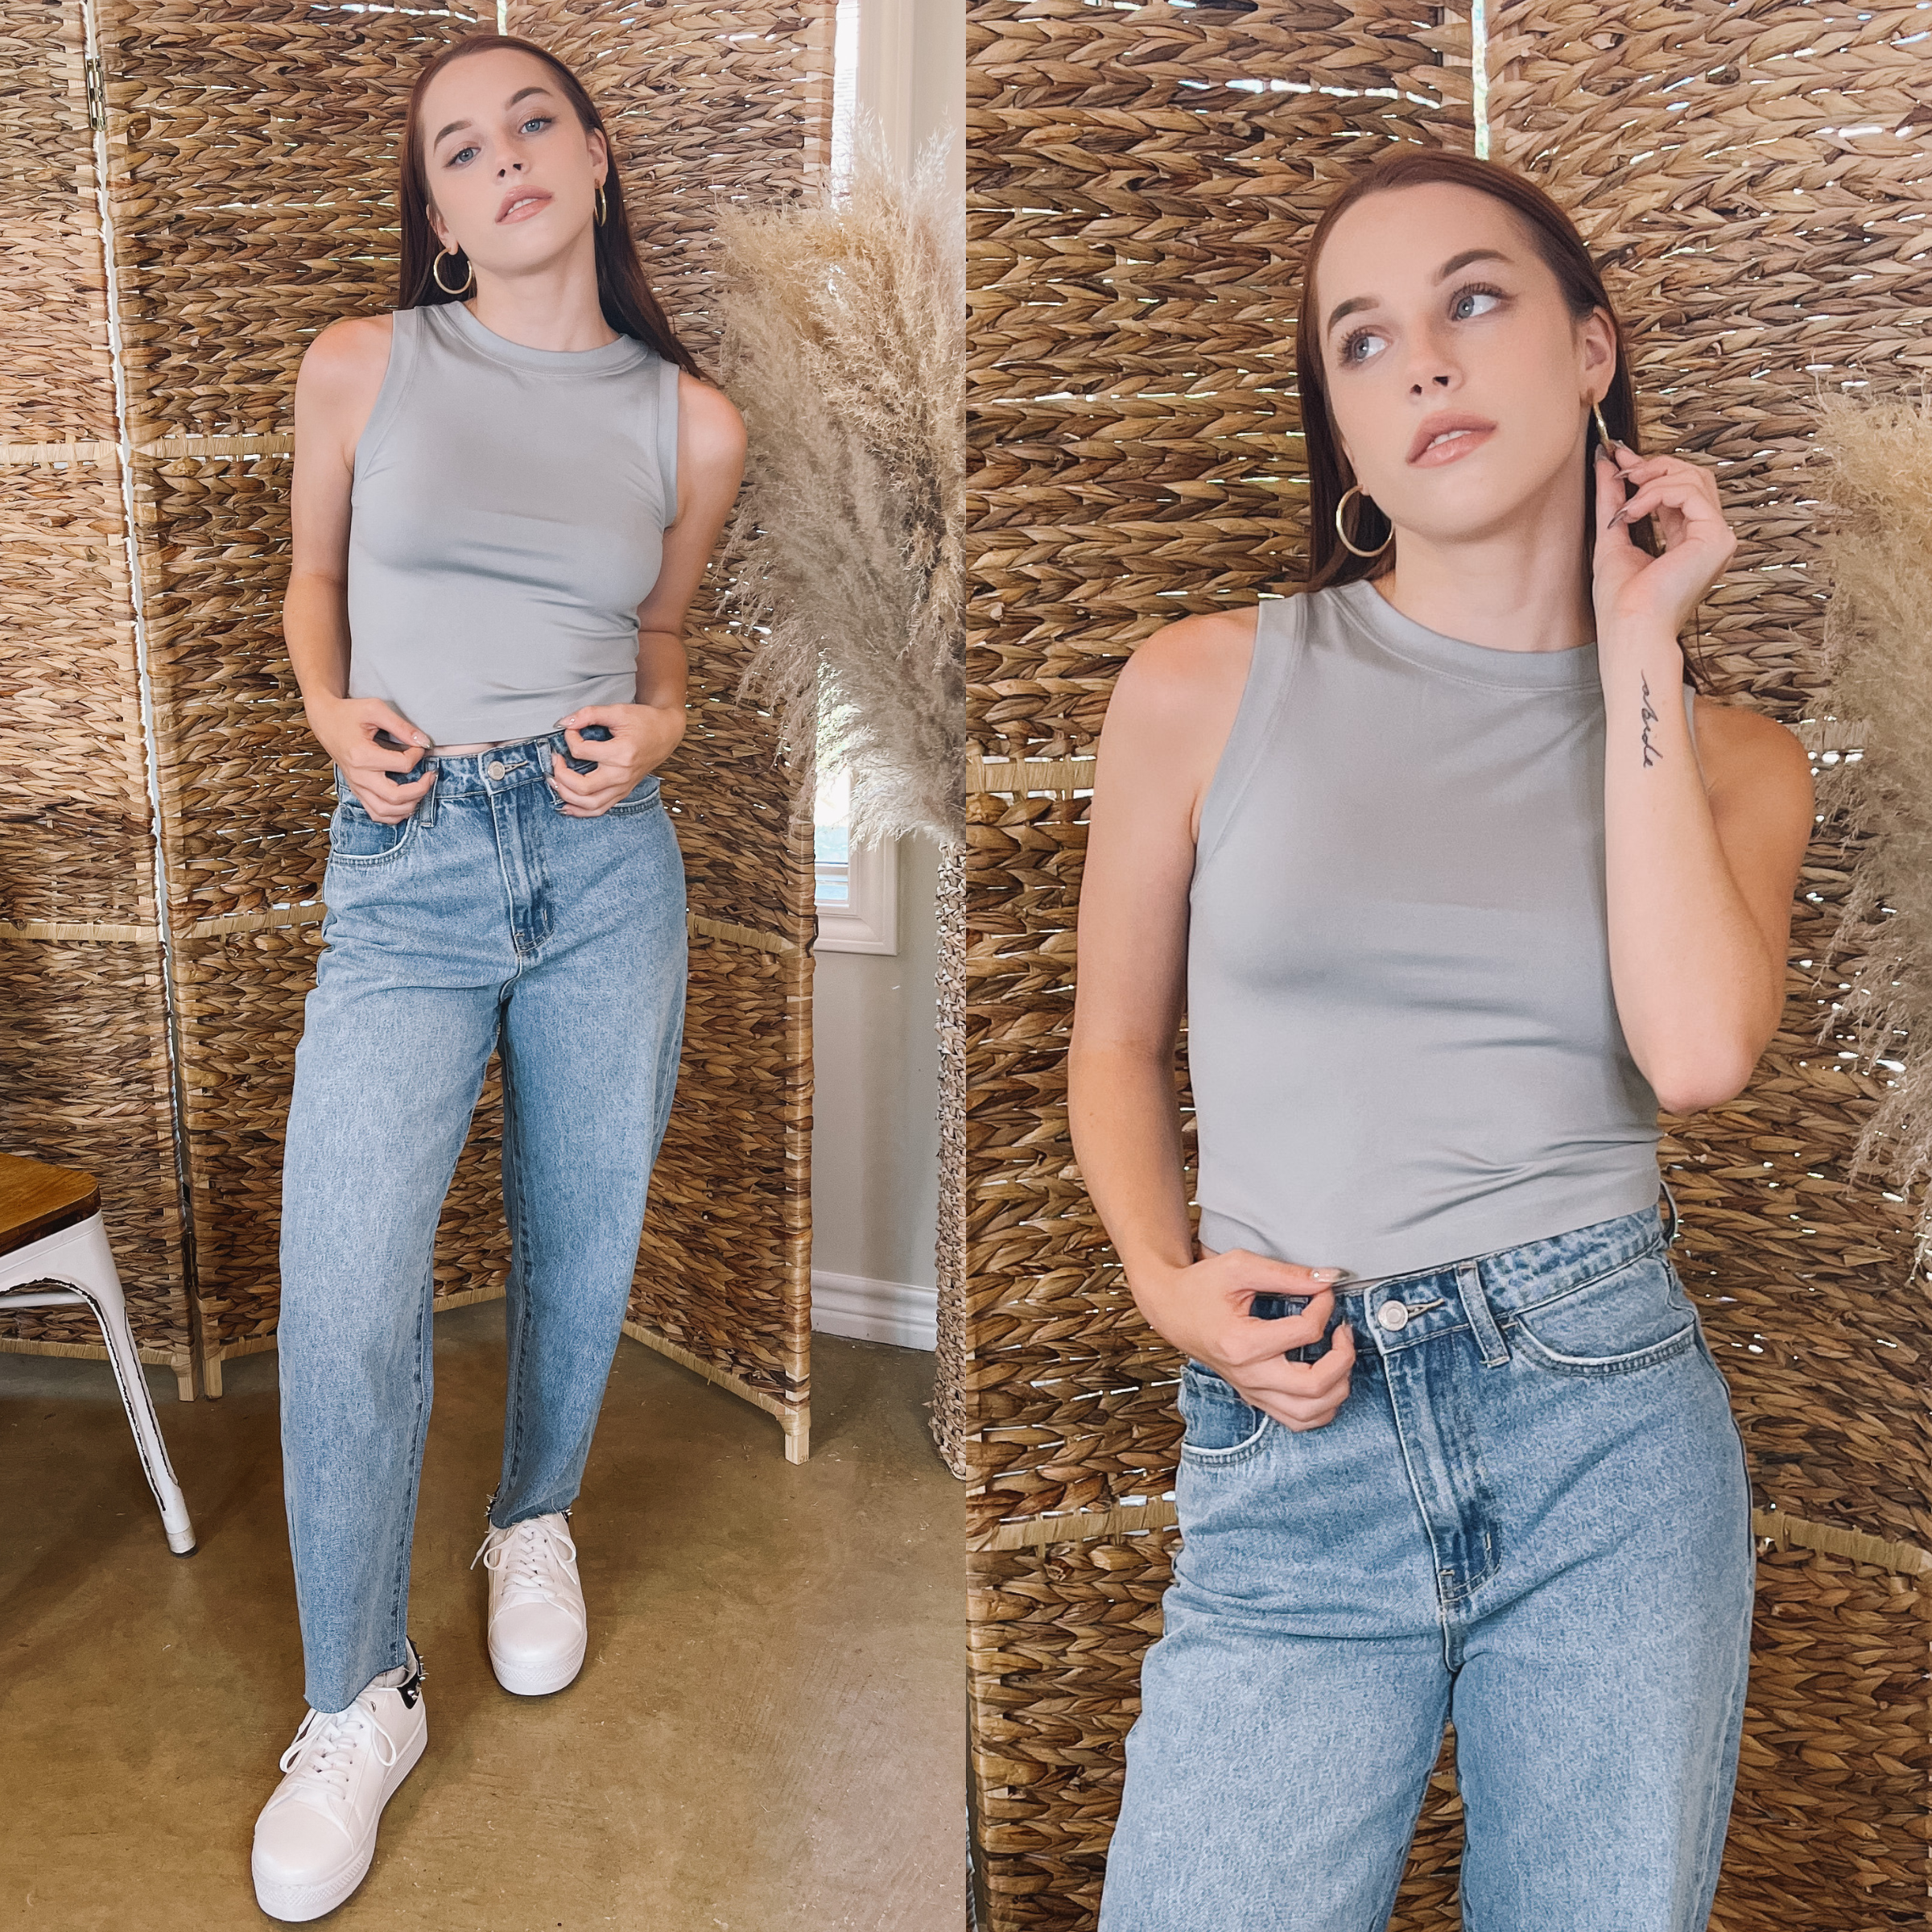 Model is wearing a grey, cropped muscle tank. The model is wearing this top with light colored boyfriend jeans, gold hoops, and white tennis shoes. 